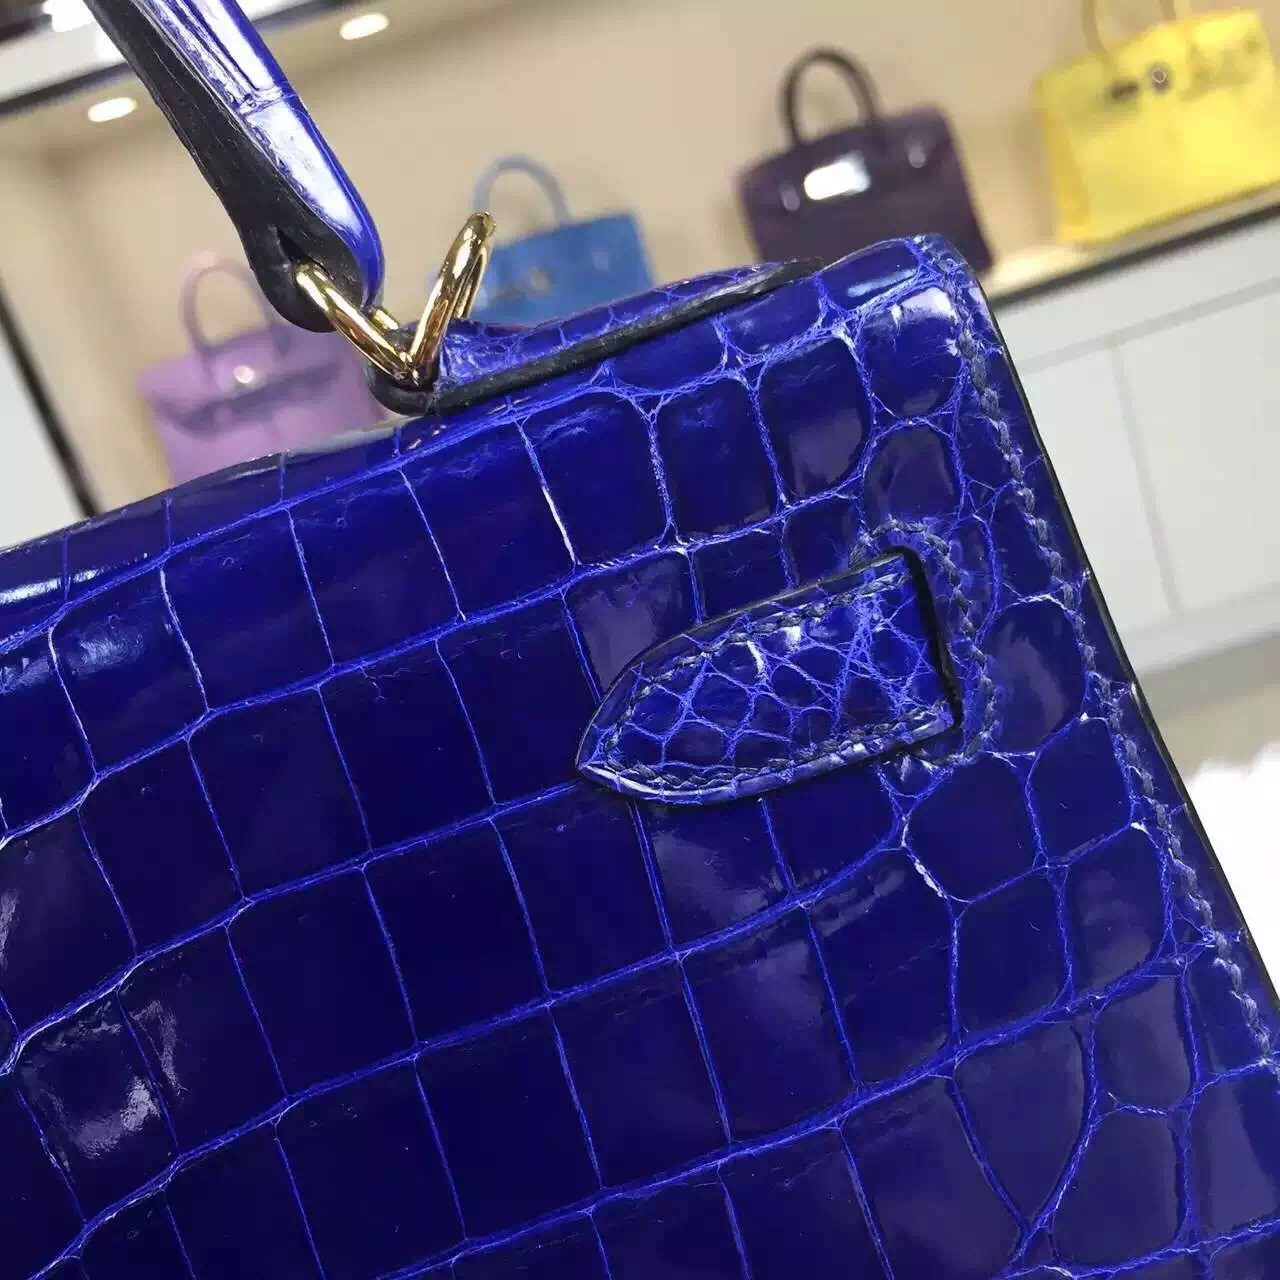 Discount Hermes Kelly32CM Crocodile Shiny Leather 7T Blue Electric Fashion Tote Bag